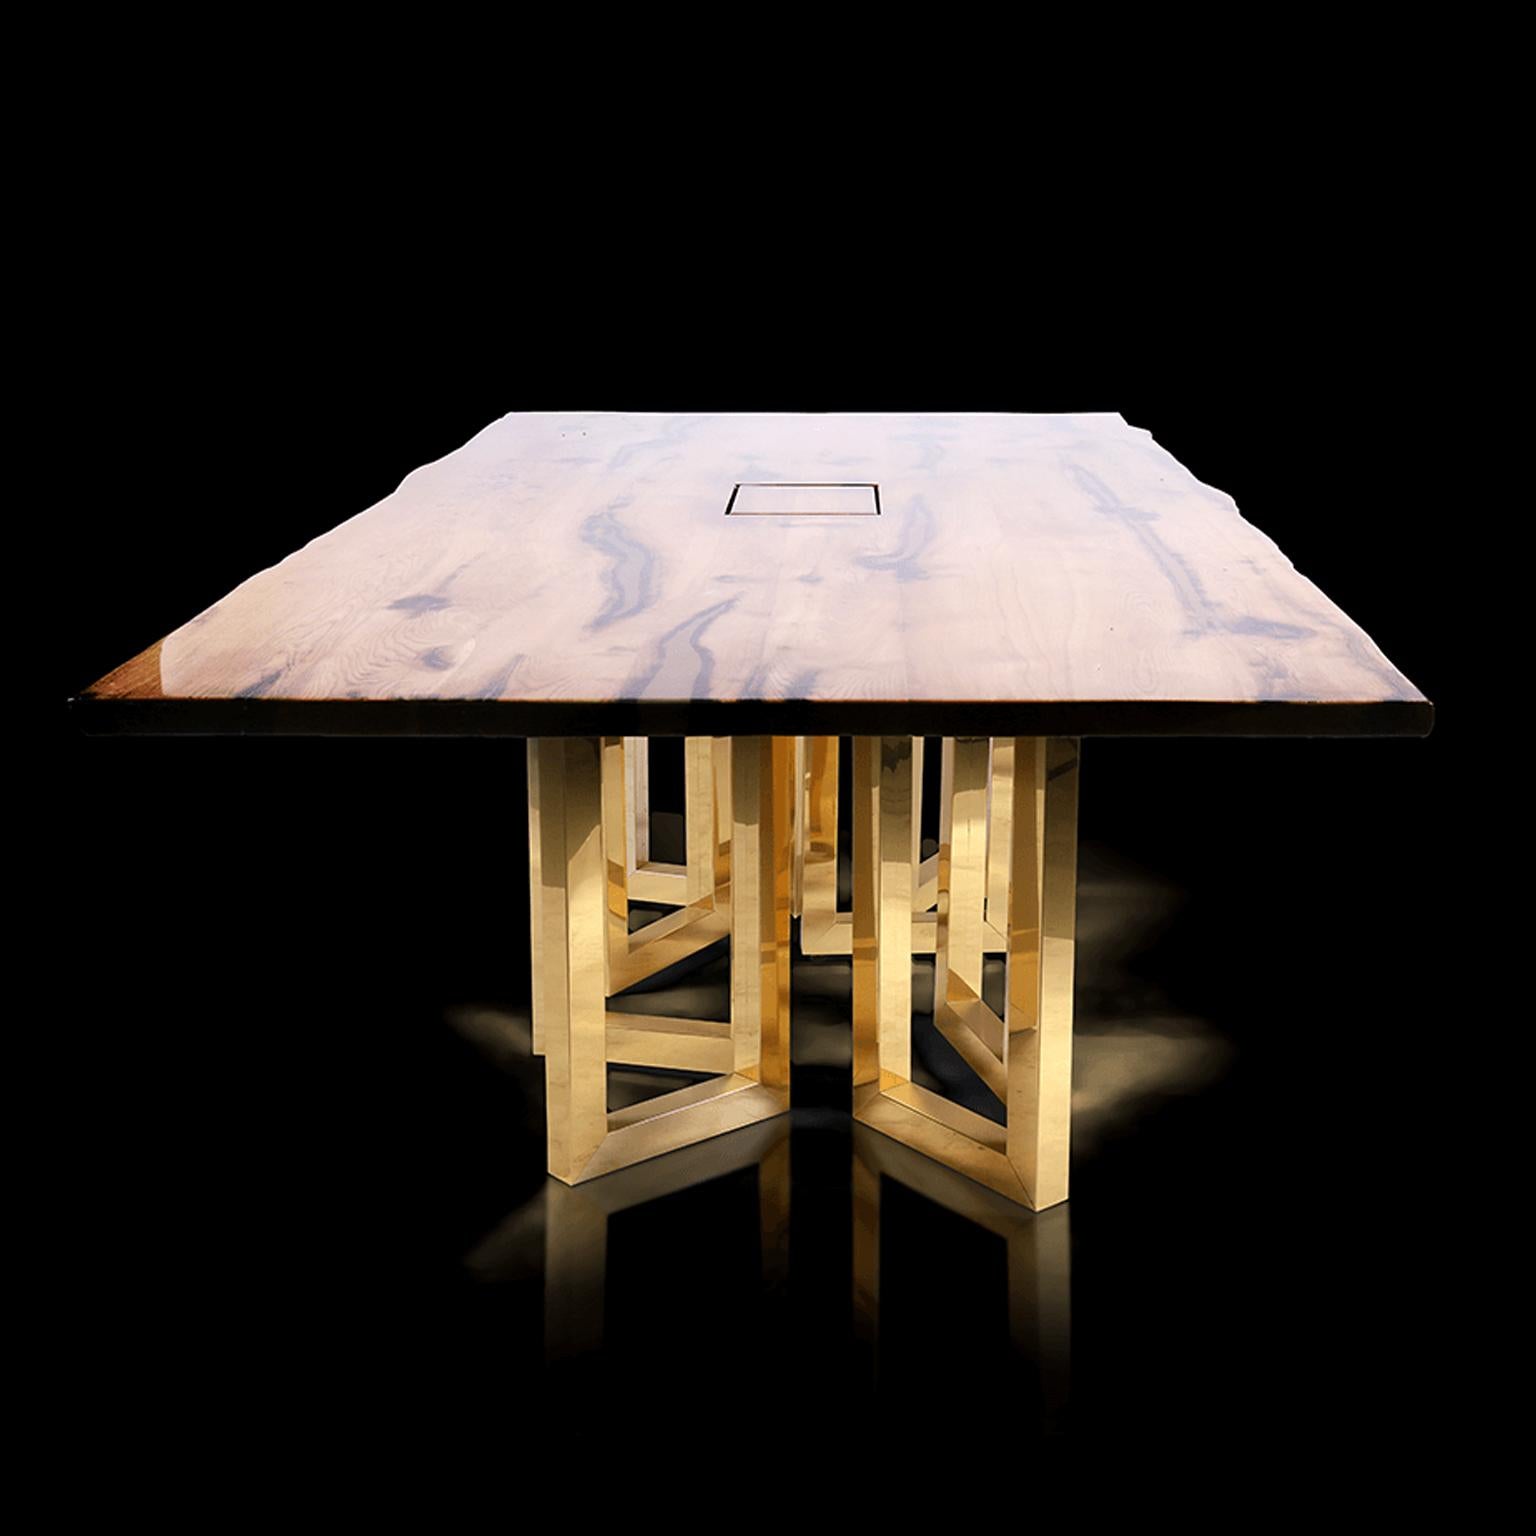 An eye-catching interplay of shapes and proportions, this table encompasses fine craftsmanship and an innovative design that will enhance any modern meeting room or dining room. This luxurious office table is handmade from old, reclaimed oak with